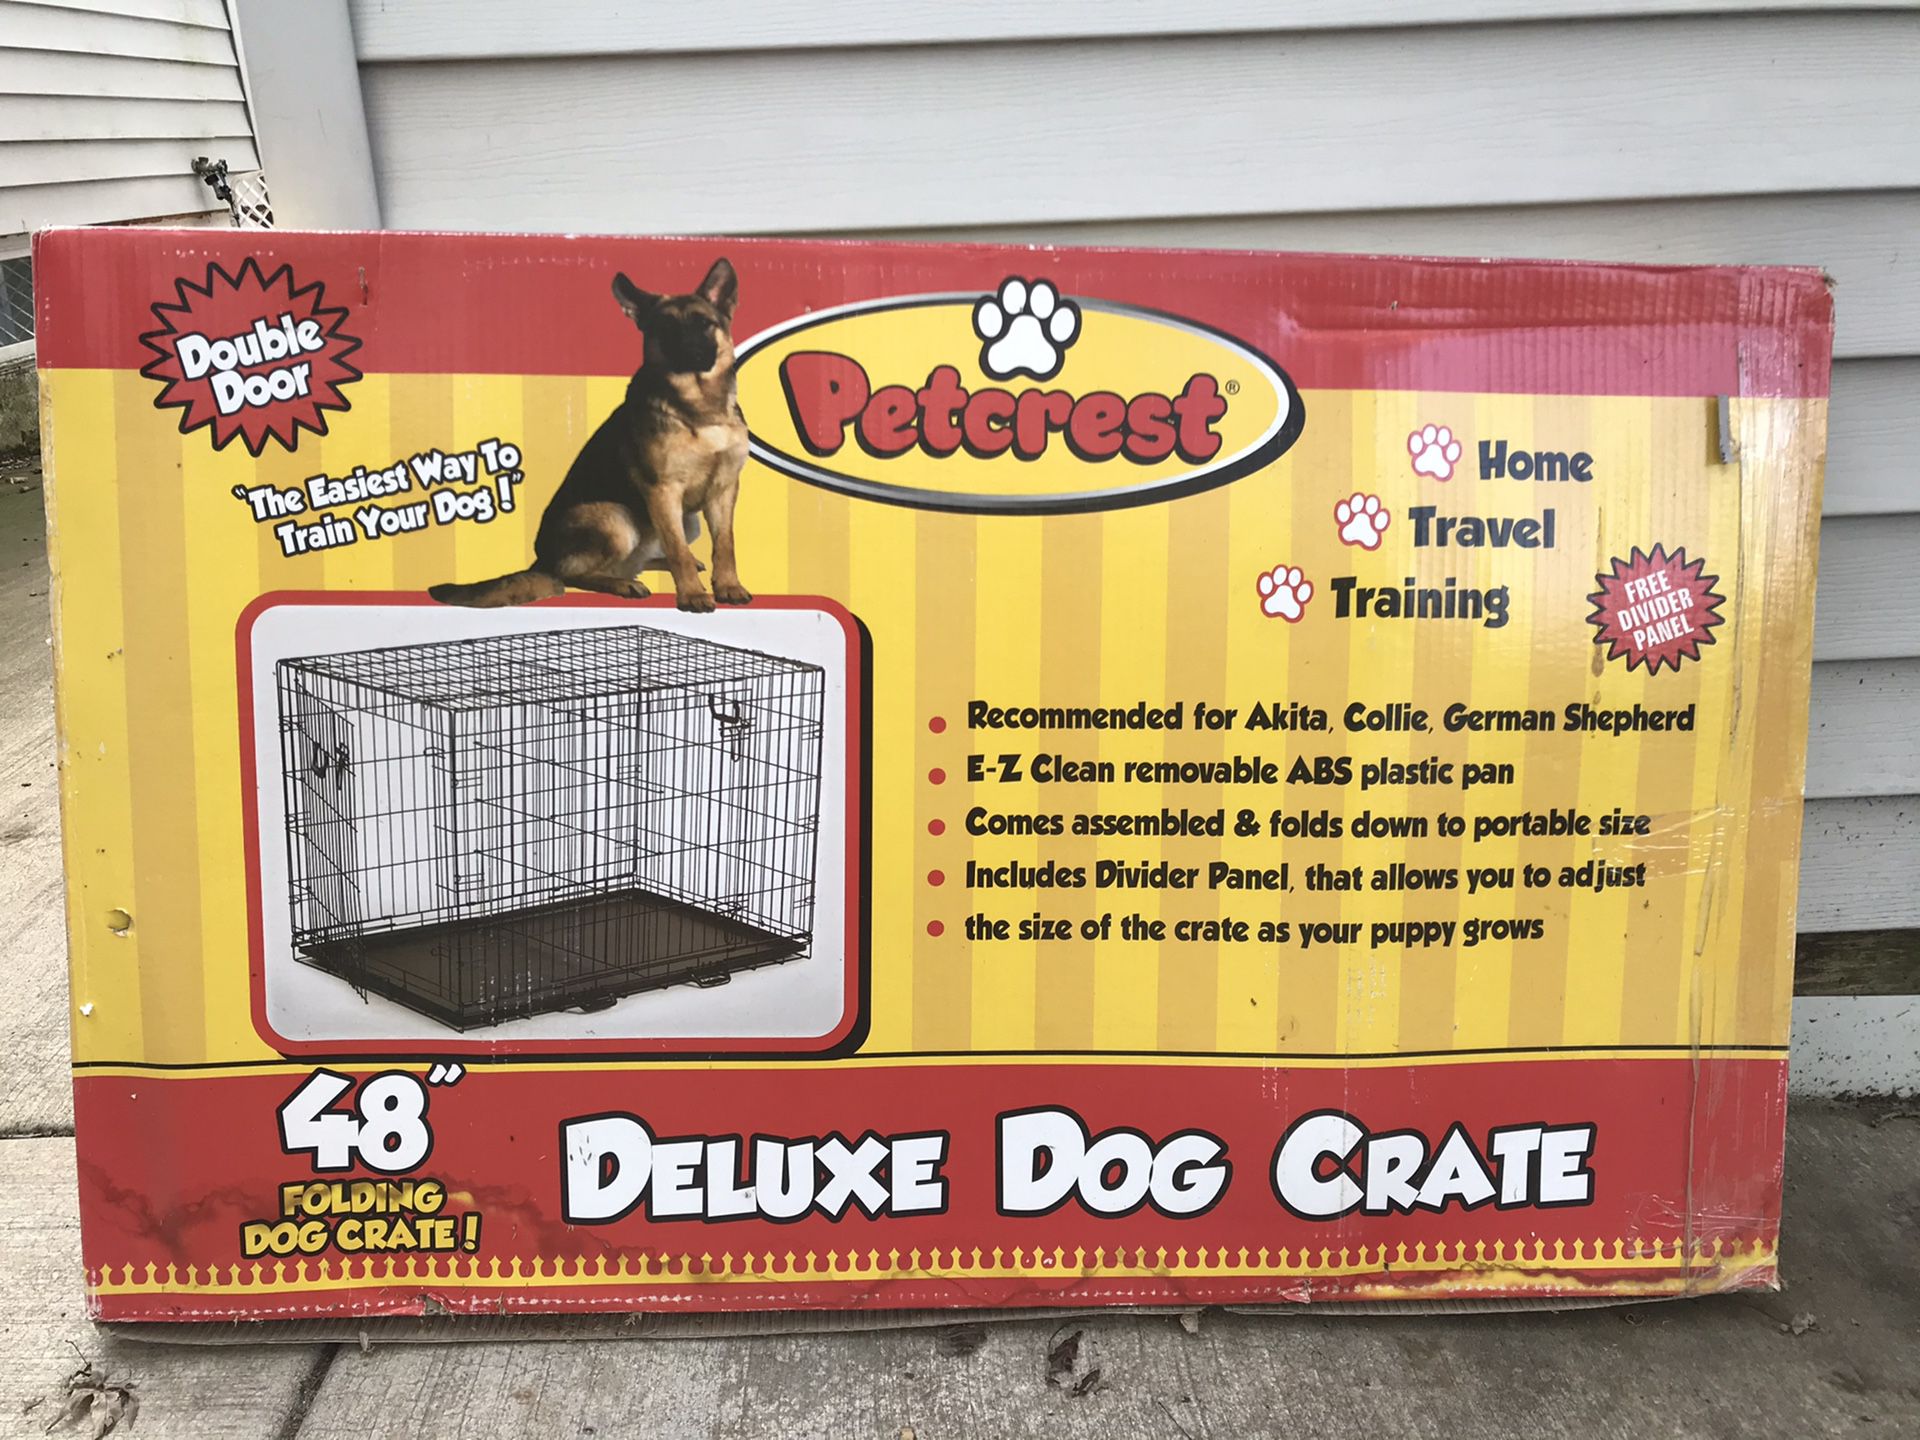 Petcrest 48” Folding Deluxe Dog Crate